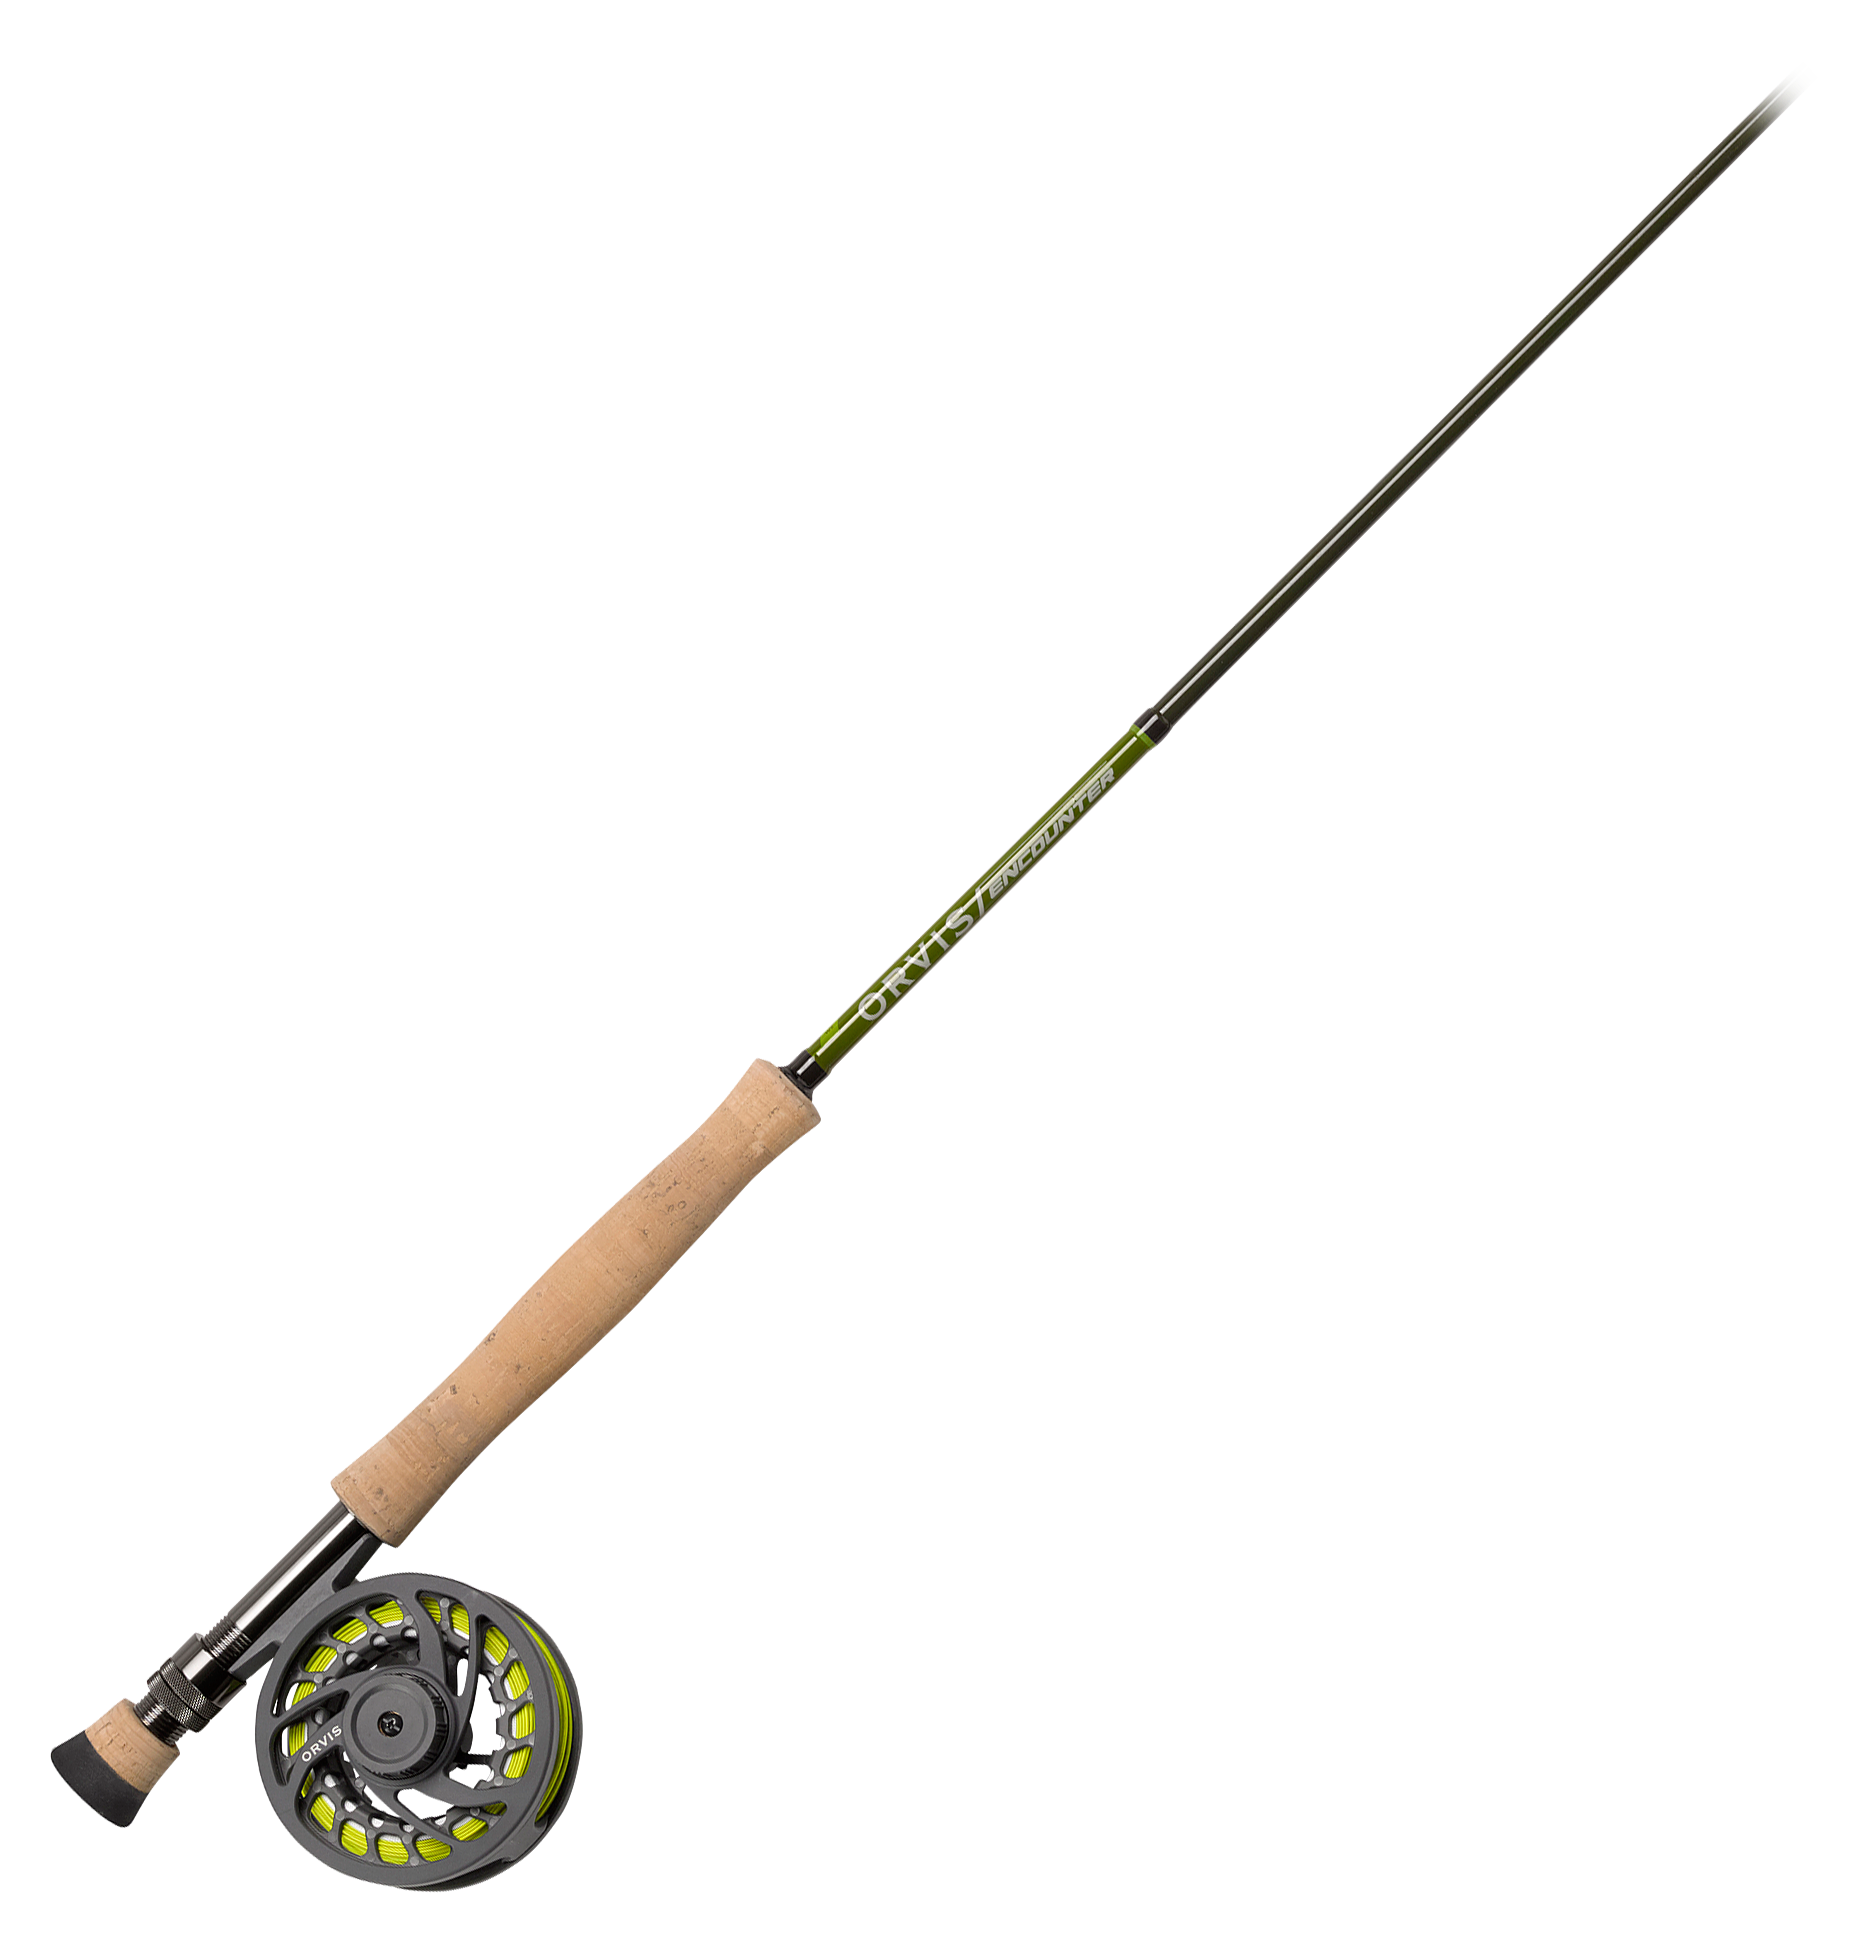 Orvis Clearwater Fly Rod Outfit 10' 3 Weight | Aussie Angler